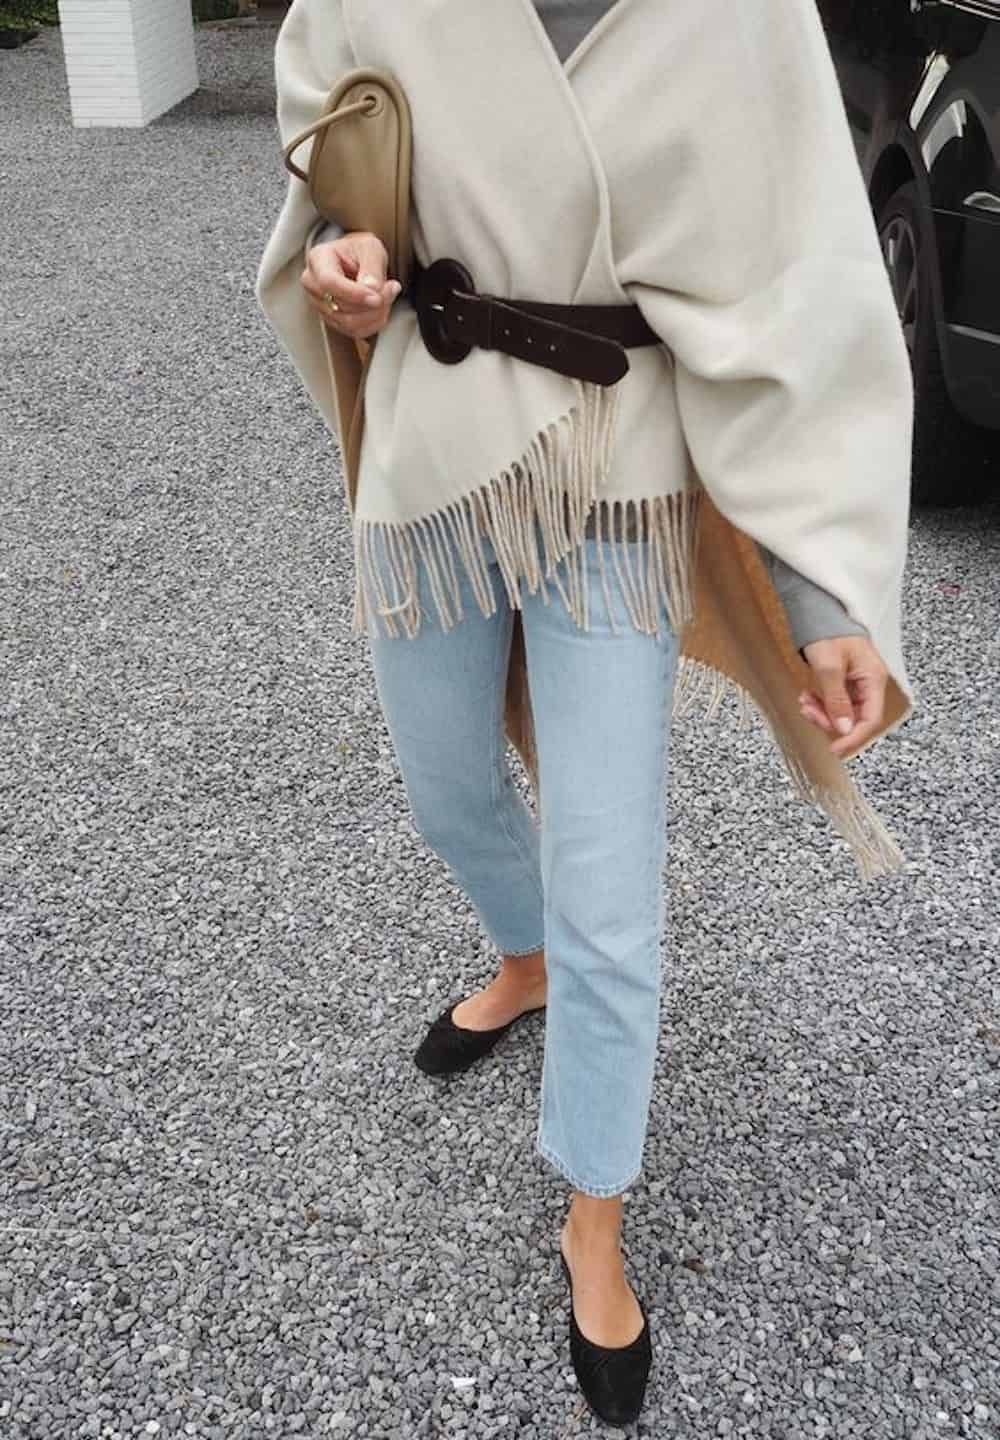 Wool Poncho Outfit Ideas for
  Women